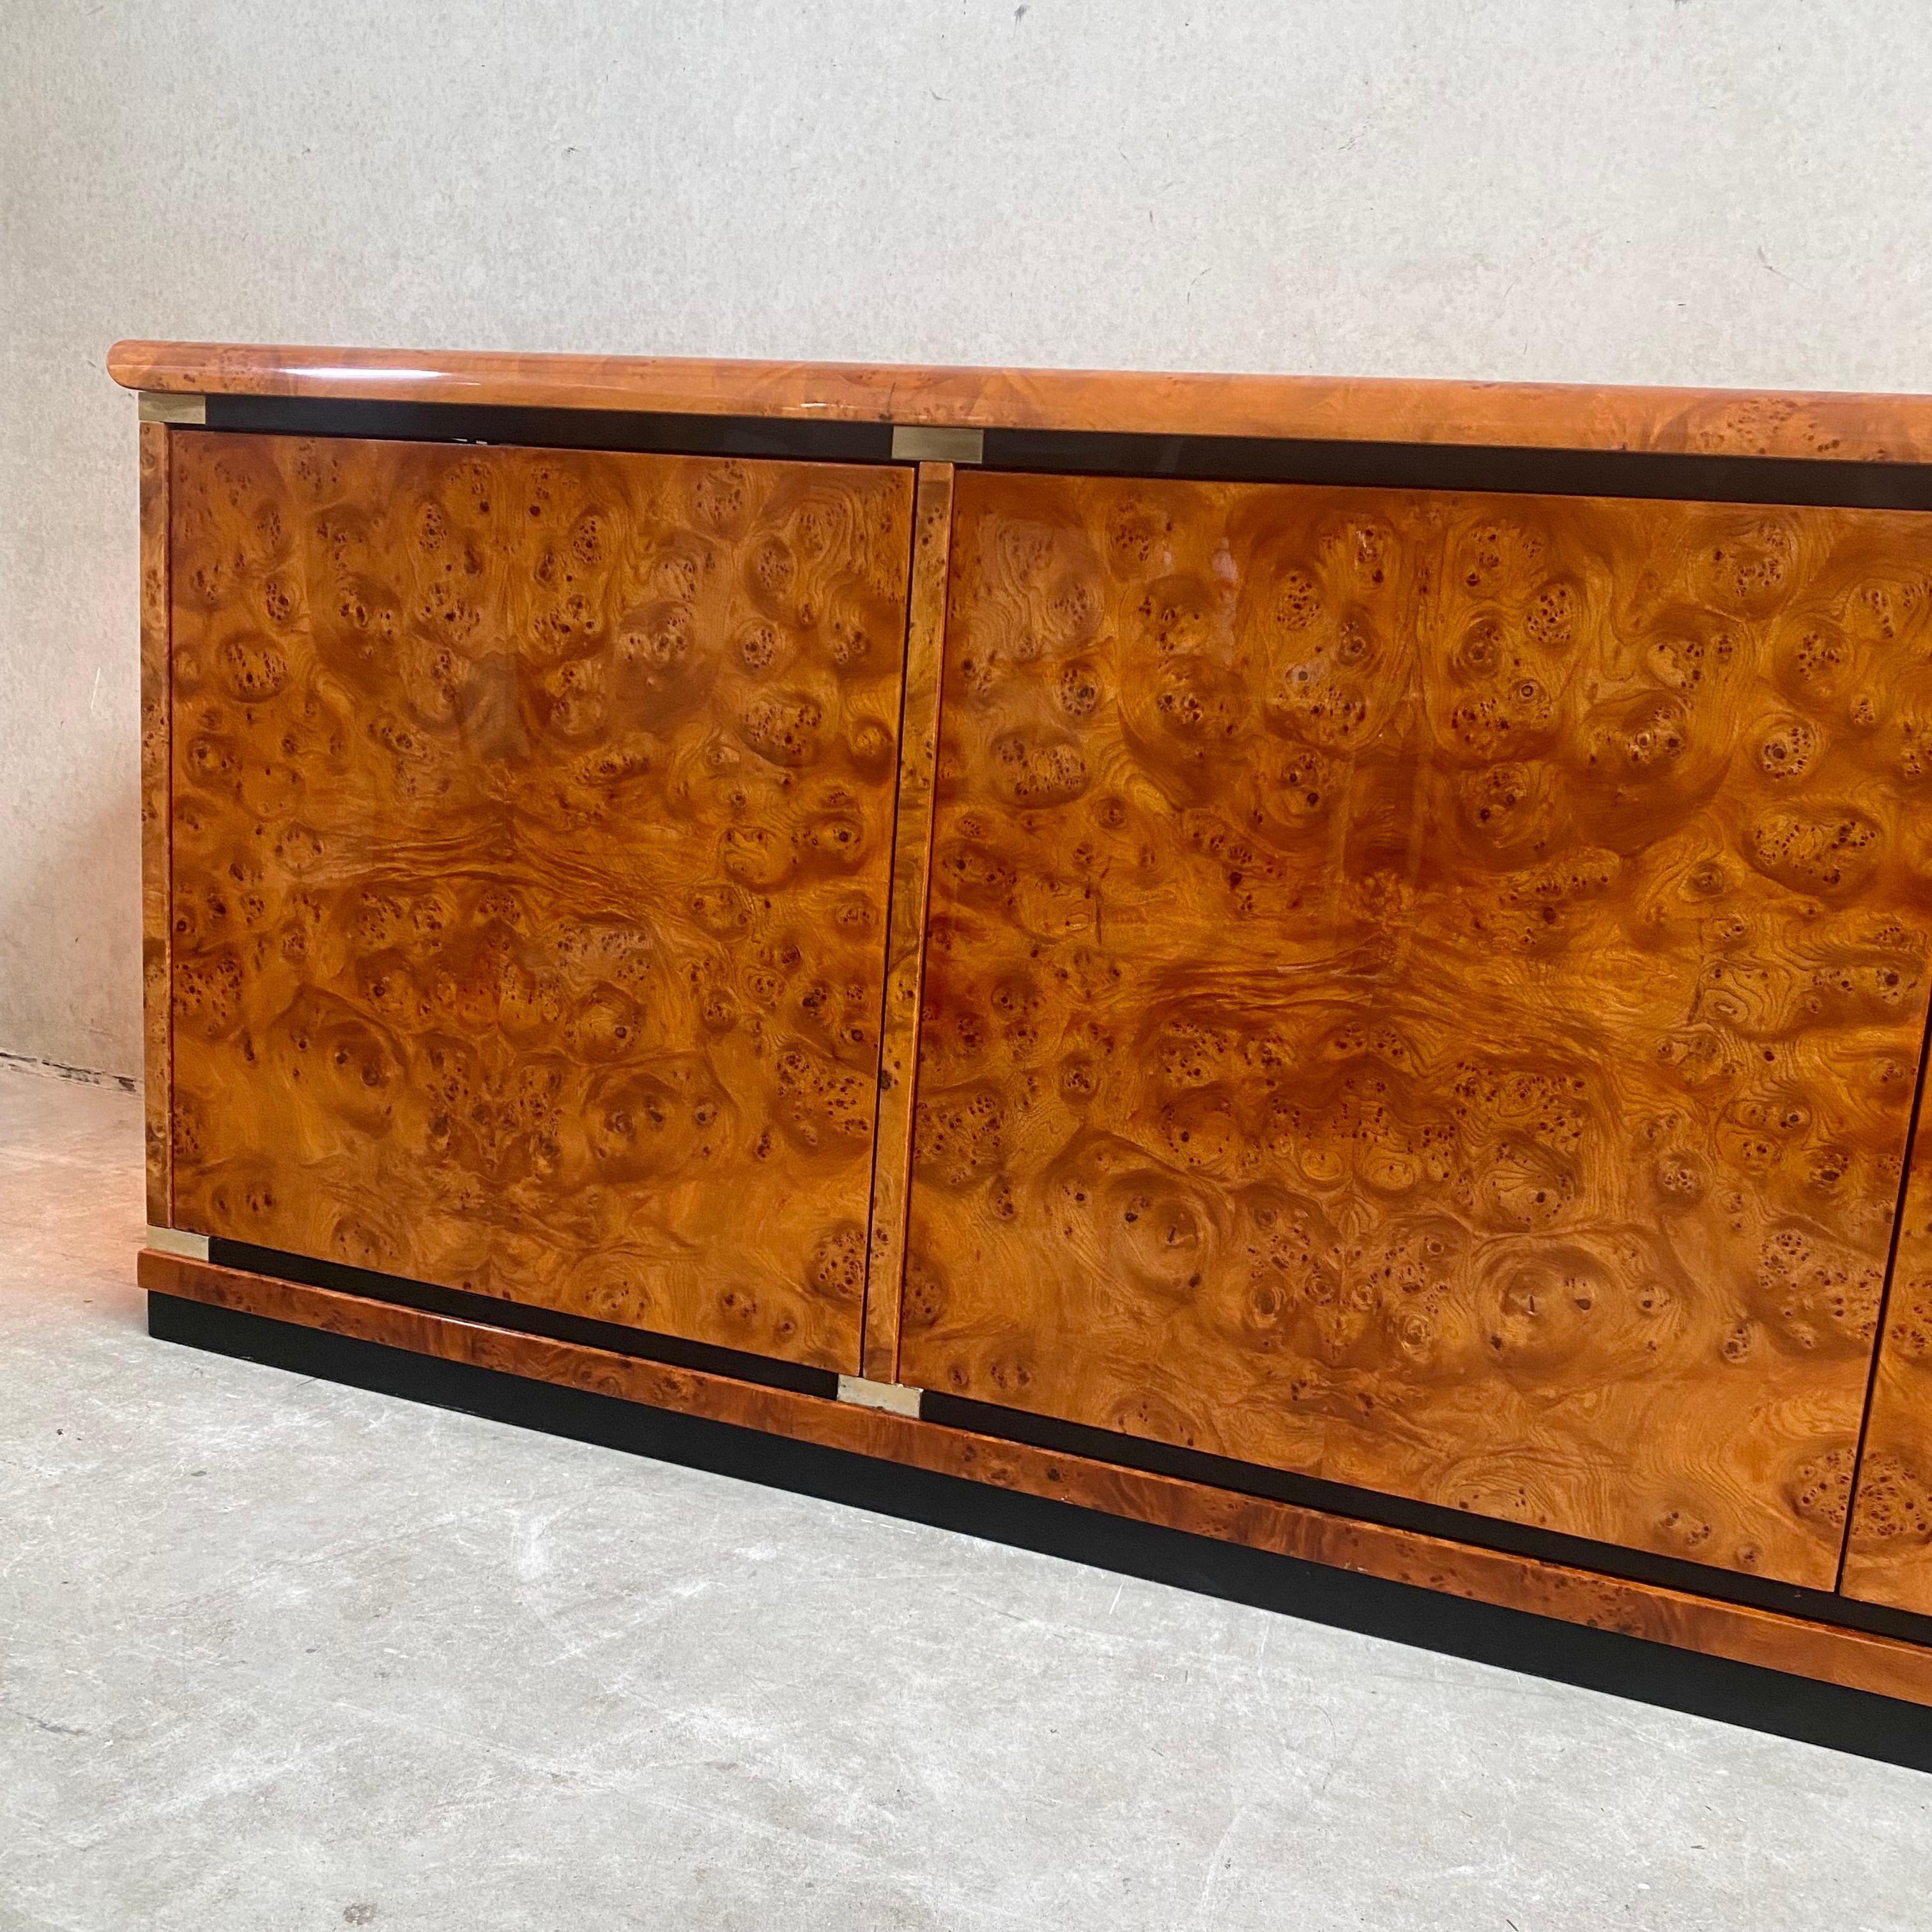 Briar Burl Wood Sideboard by Guerini Emilio for Gdm 24 Kt Gold Plated Italy 1980 For Sale 11